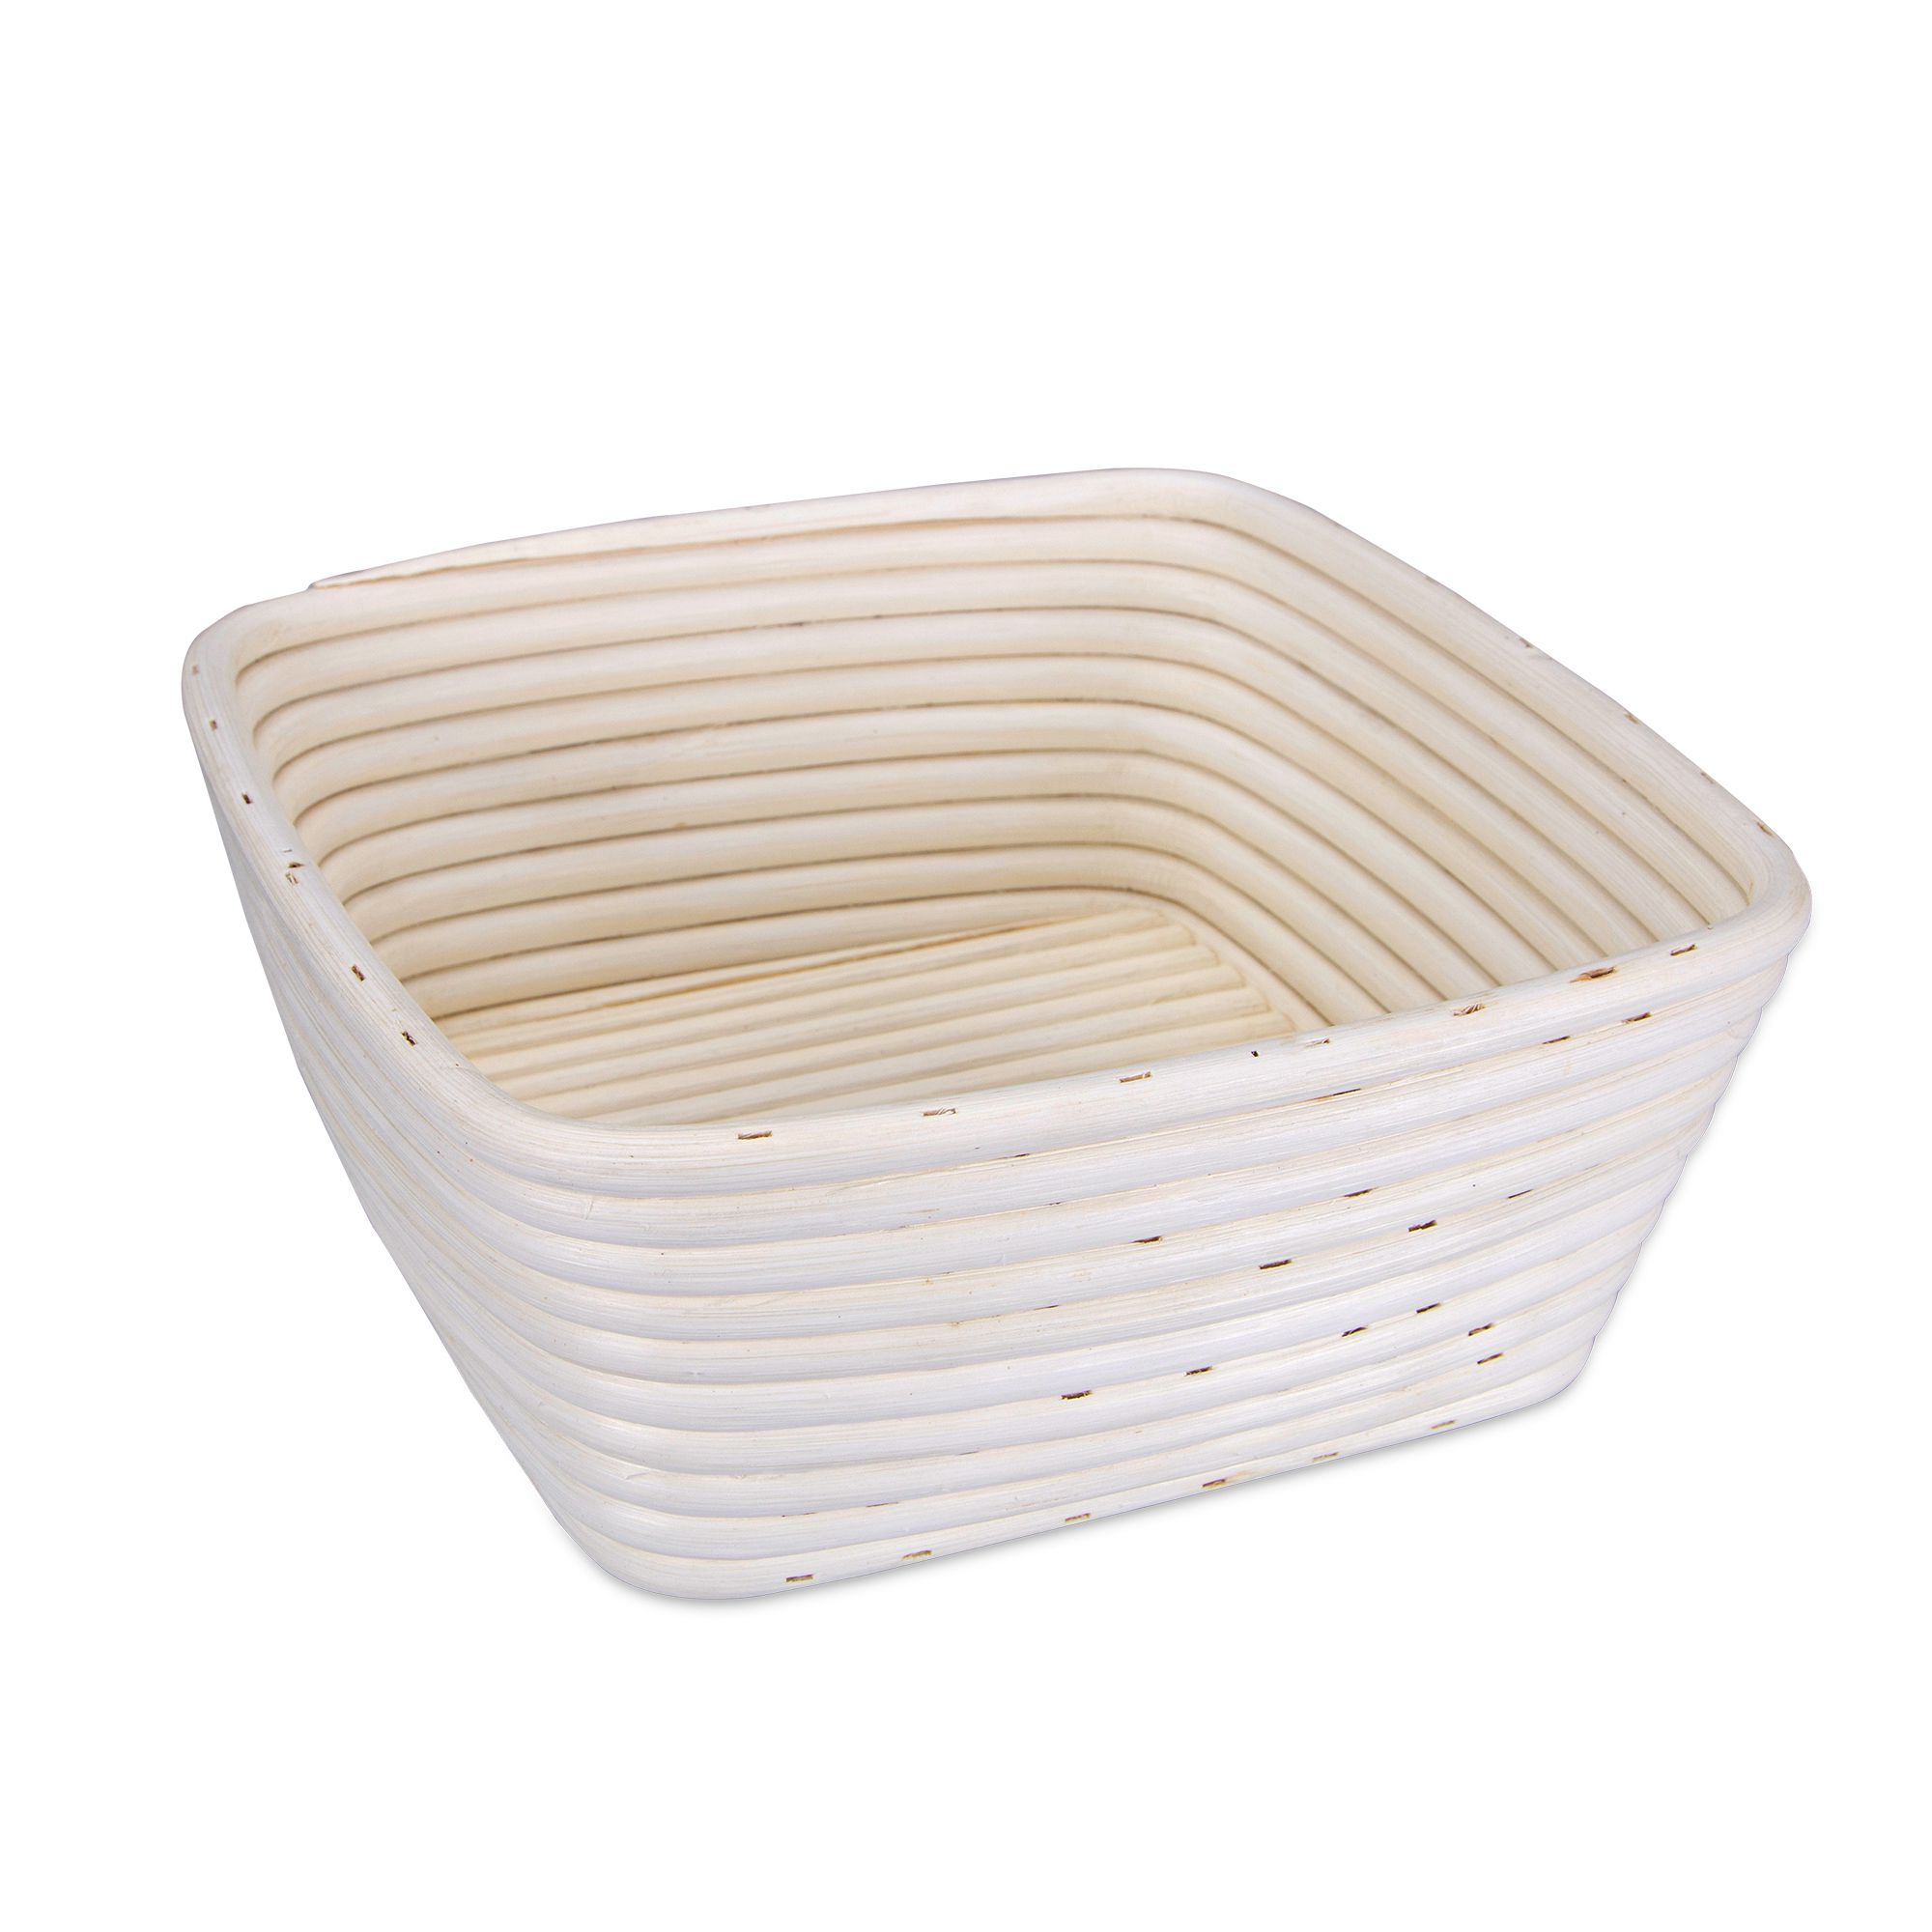 Städter - Proofing basket square with linen cover, rattan 22 x 22 cm / H 8,5 cm